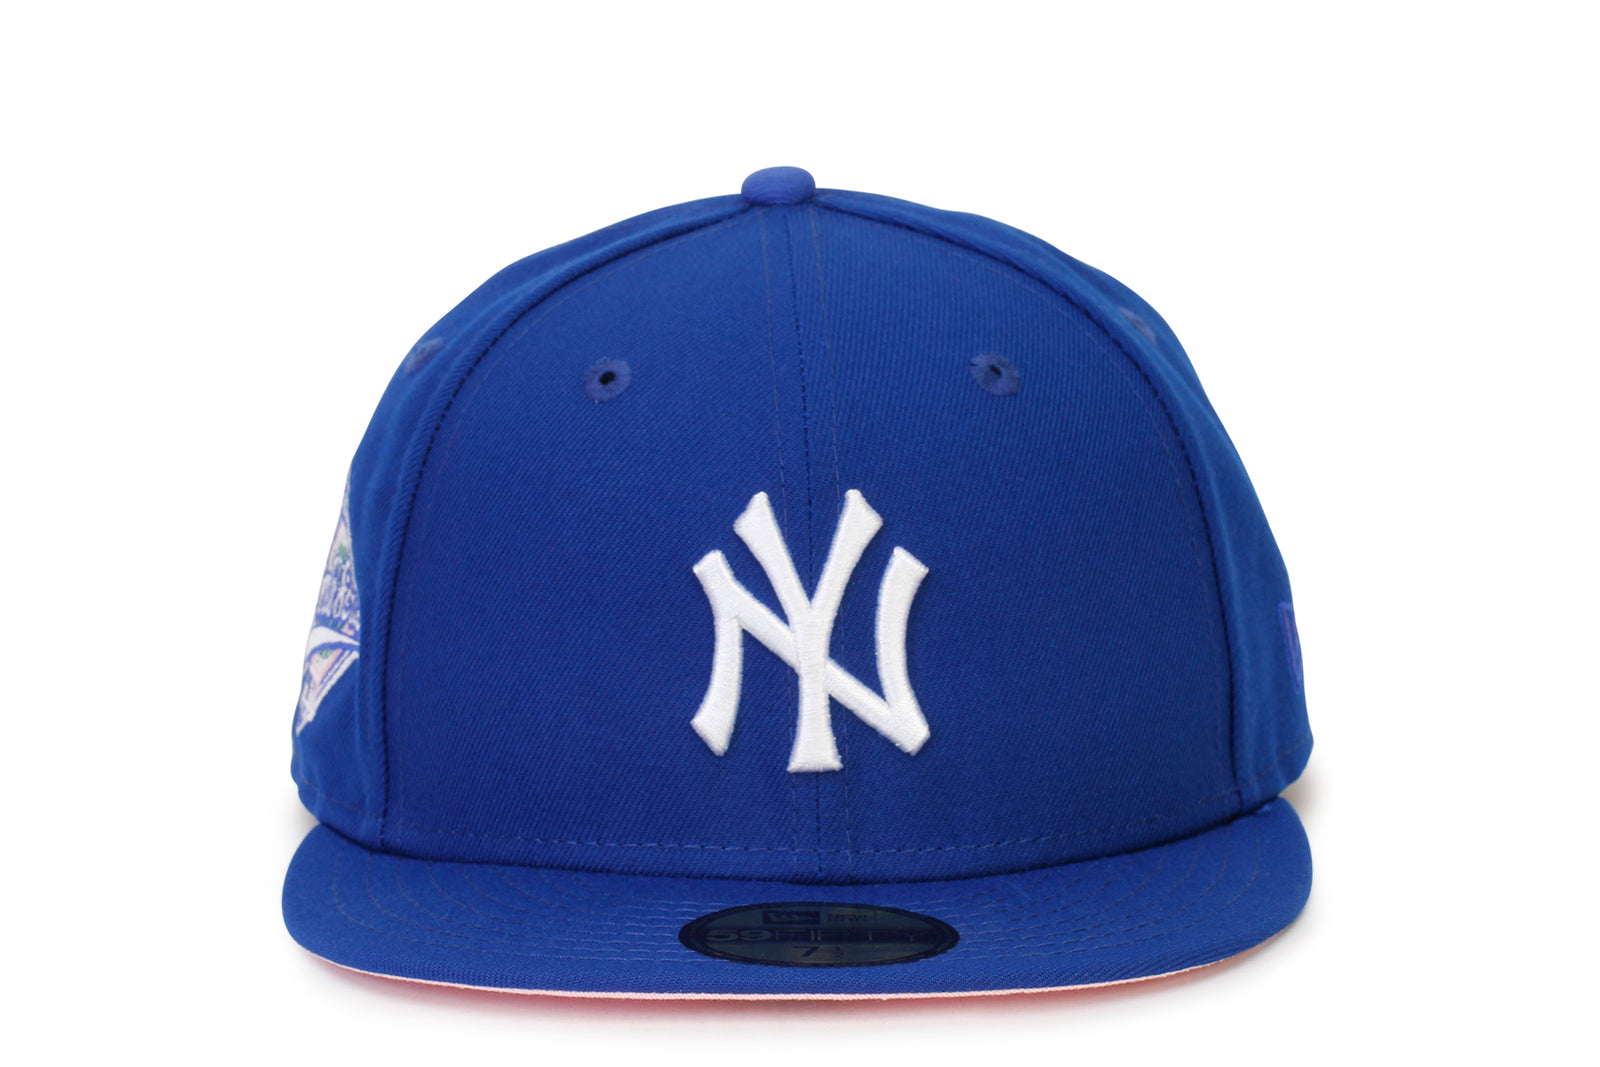  New Era NY New York Mets 9FIFTY 1986 World Series Champions  Patch WS Retro Cap, Adjustable Hat : Sports & Outdoors